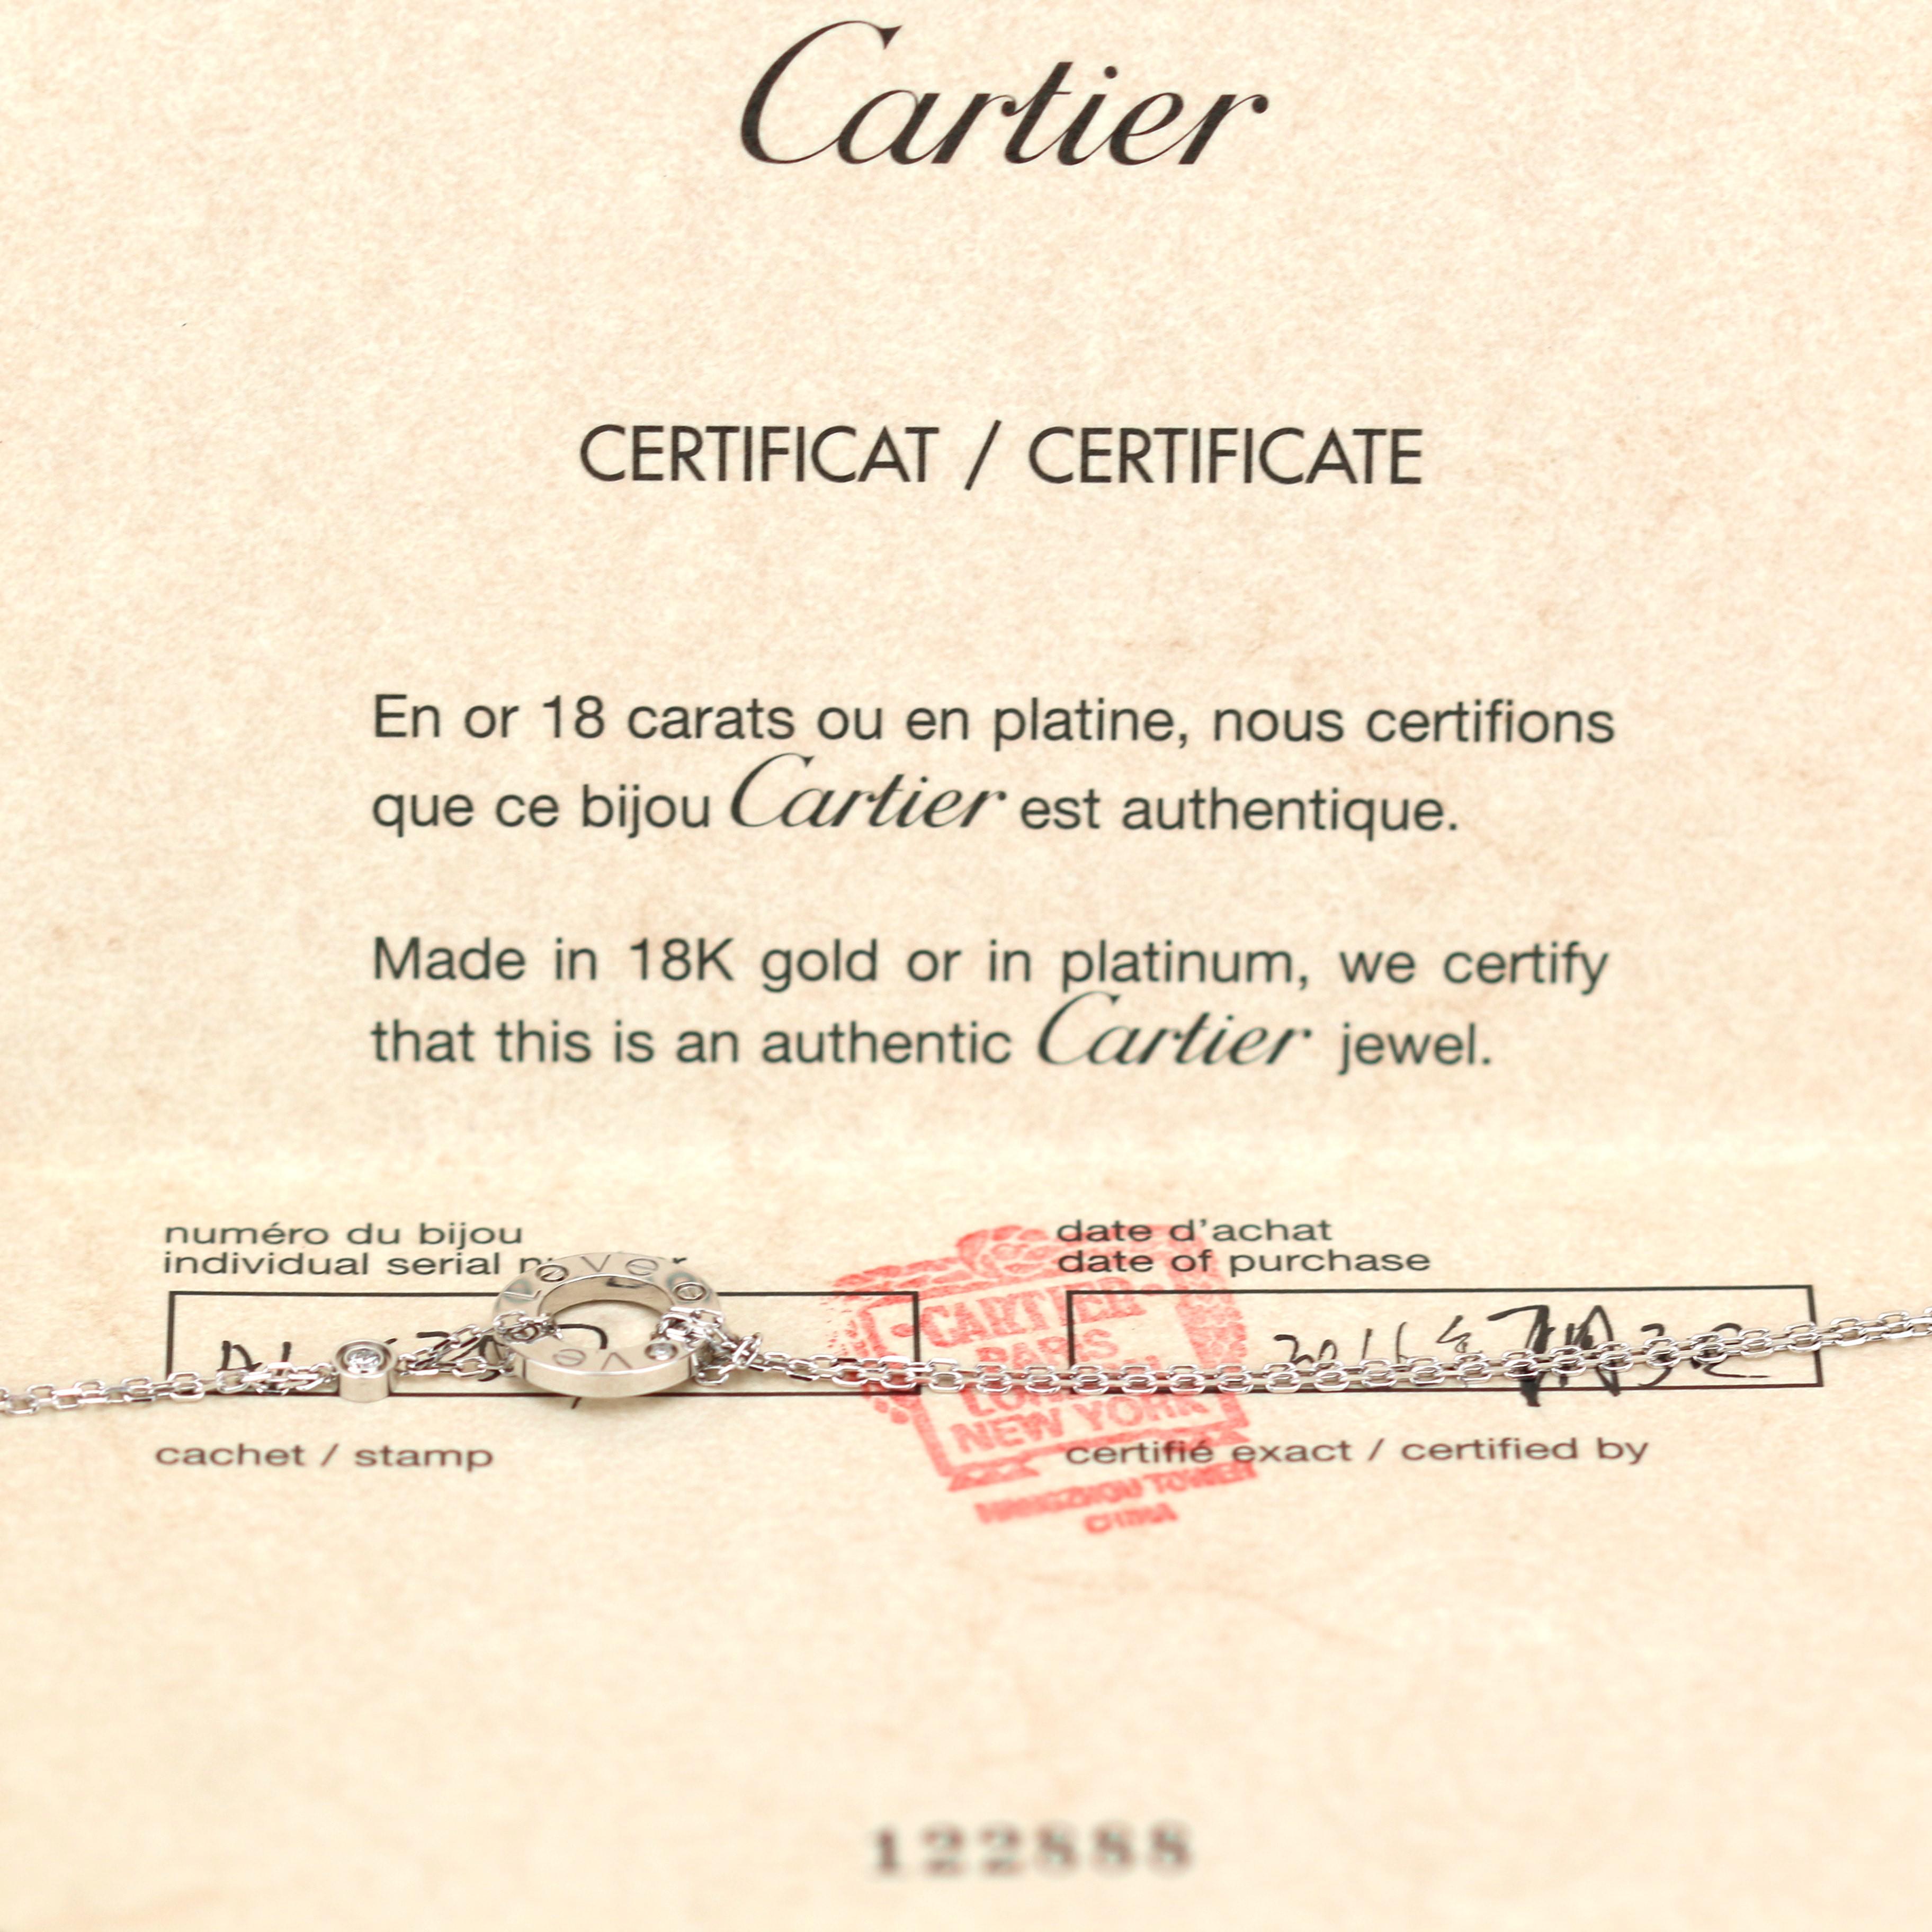 Dandelion Antiques Code	AT-1266
Brand	                                Cartier
Model	                                B6038100
Retail Price	                        £2100 / $2,630 / €2470
Date                                       